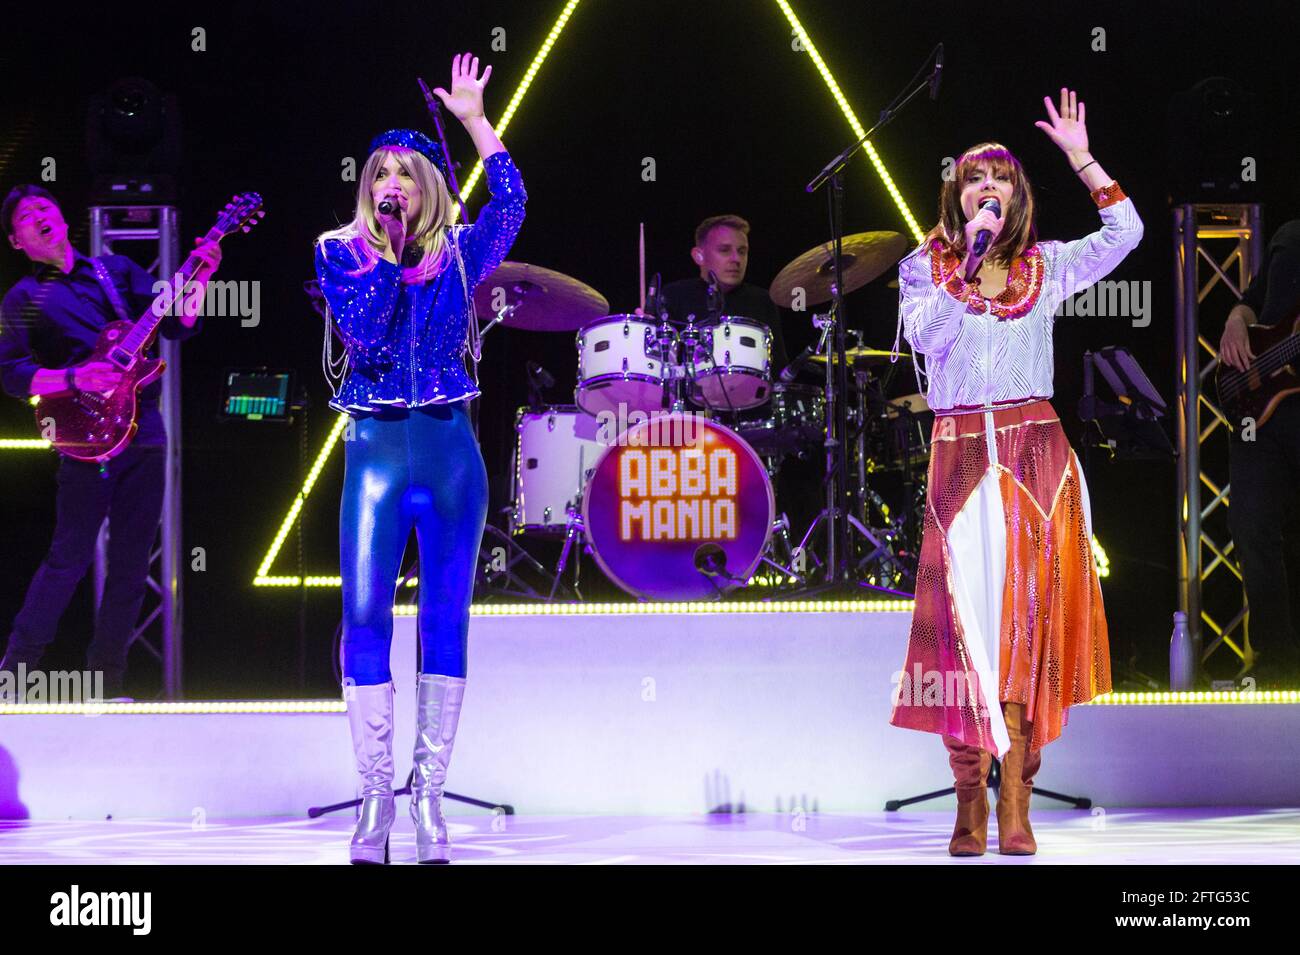 London, UK. 21st May, 2021. The cast of ABBA MANIA perform at a photocall  at the Shaftesbury Theatre as lockdown restrictions are eased slightly and  audiences can return. ABBA MANIA is the